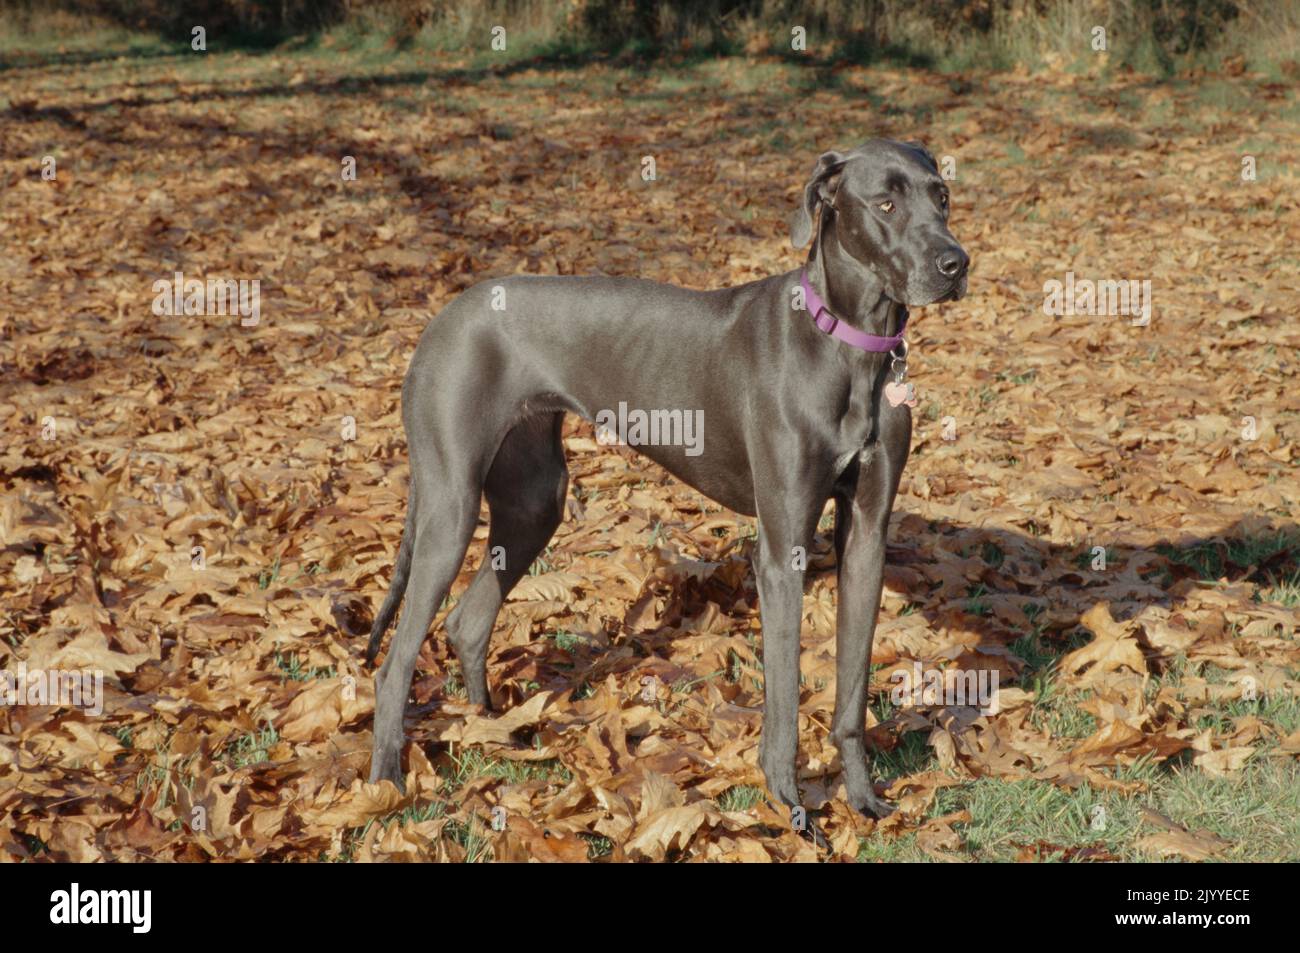 Great Dane in pink collar standing in leaves looking ahead casting shadow Stock Photo